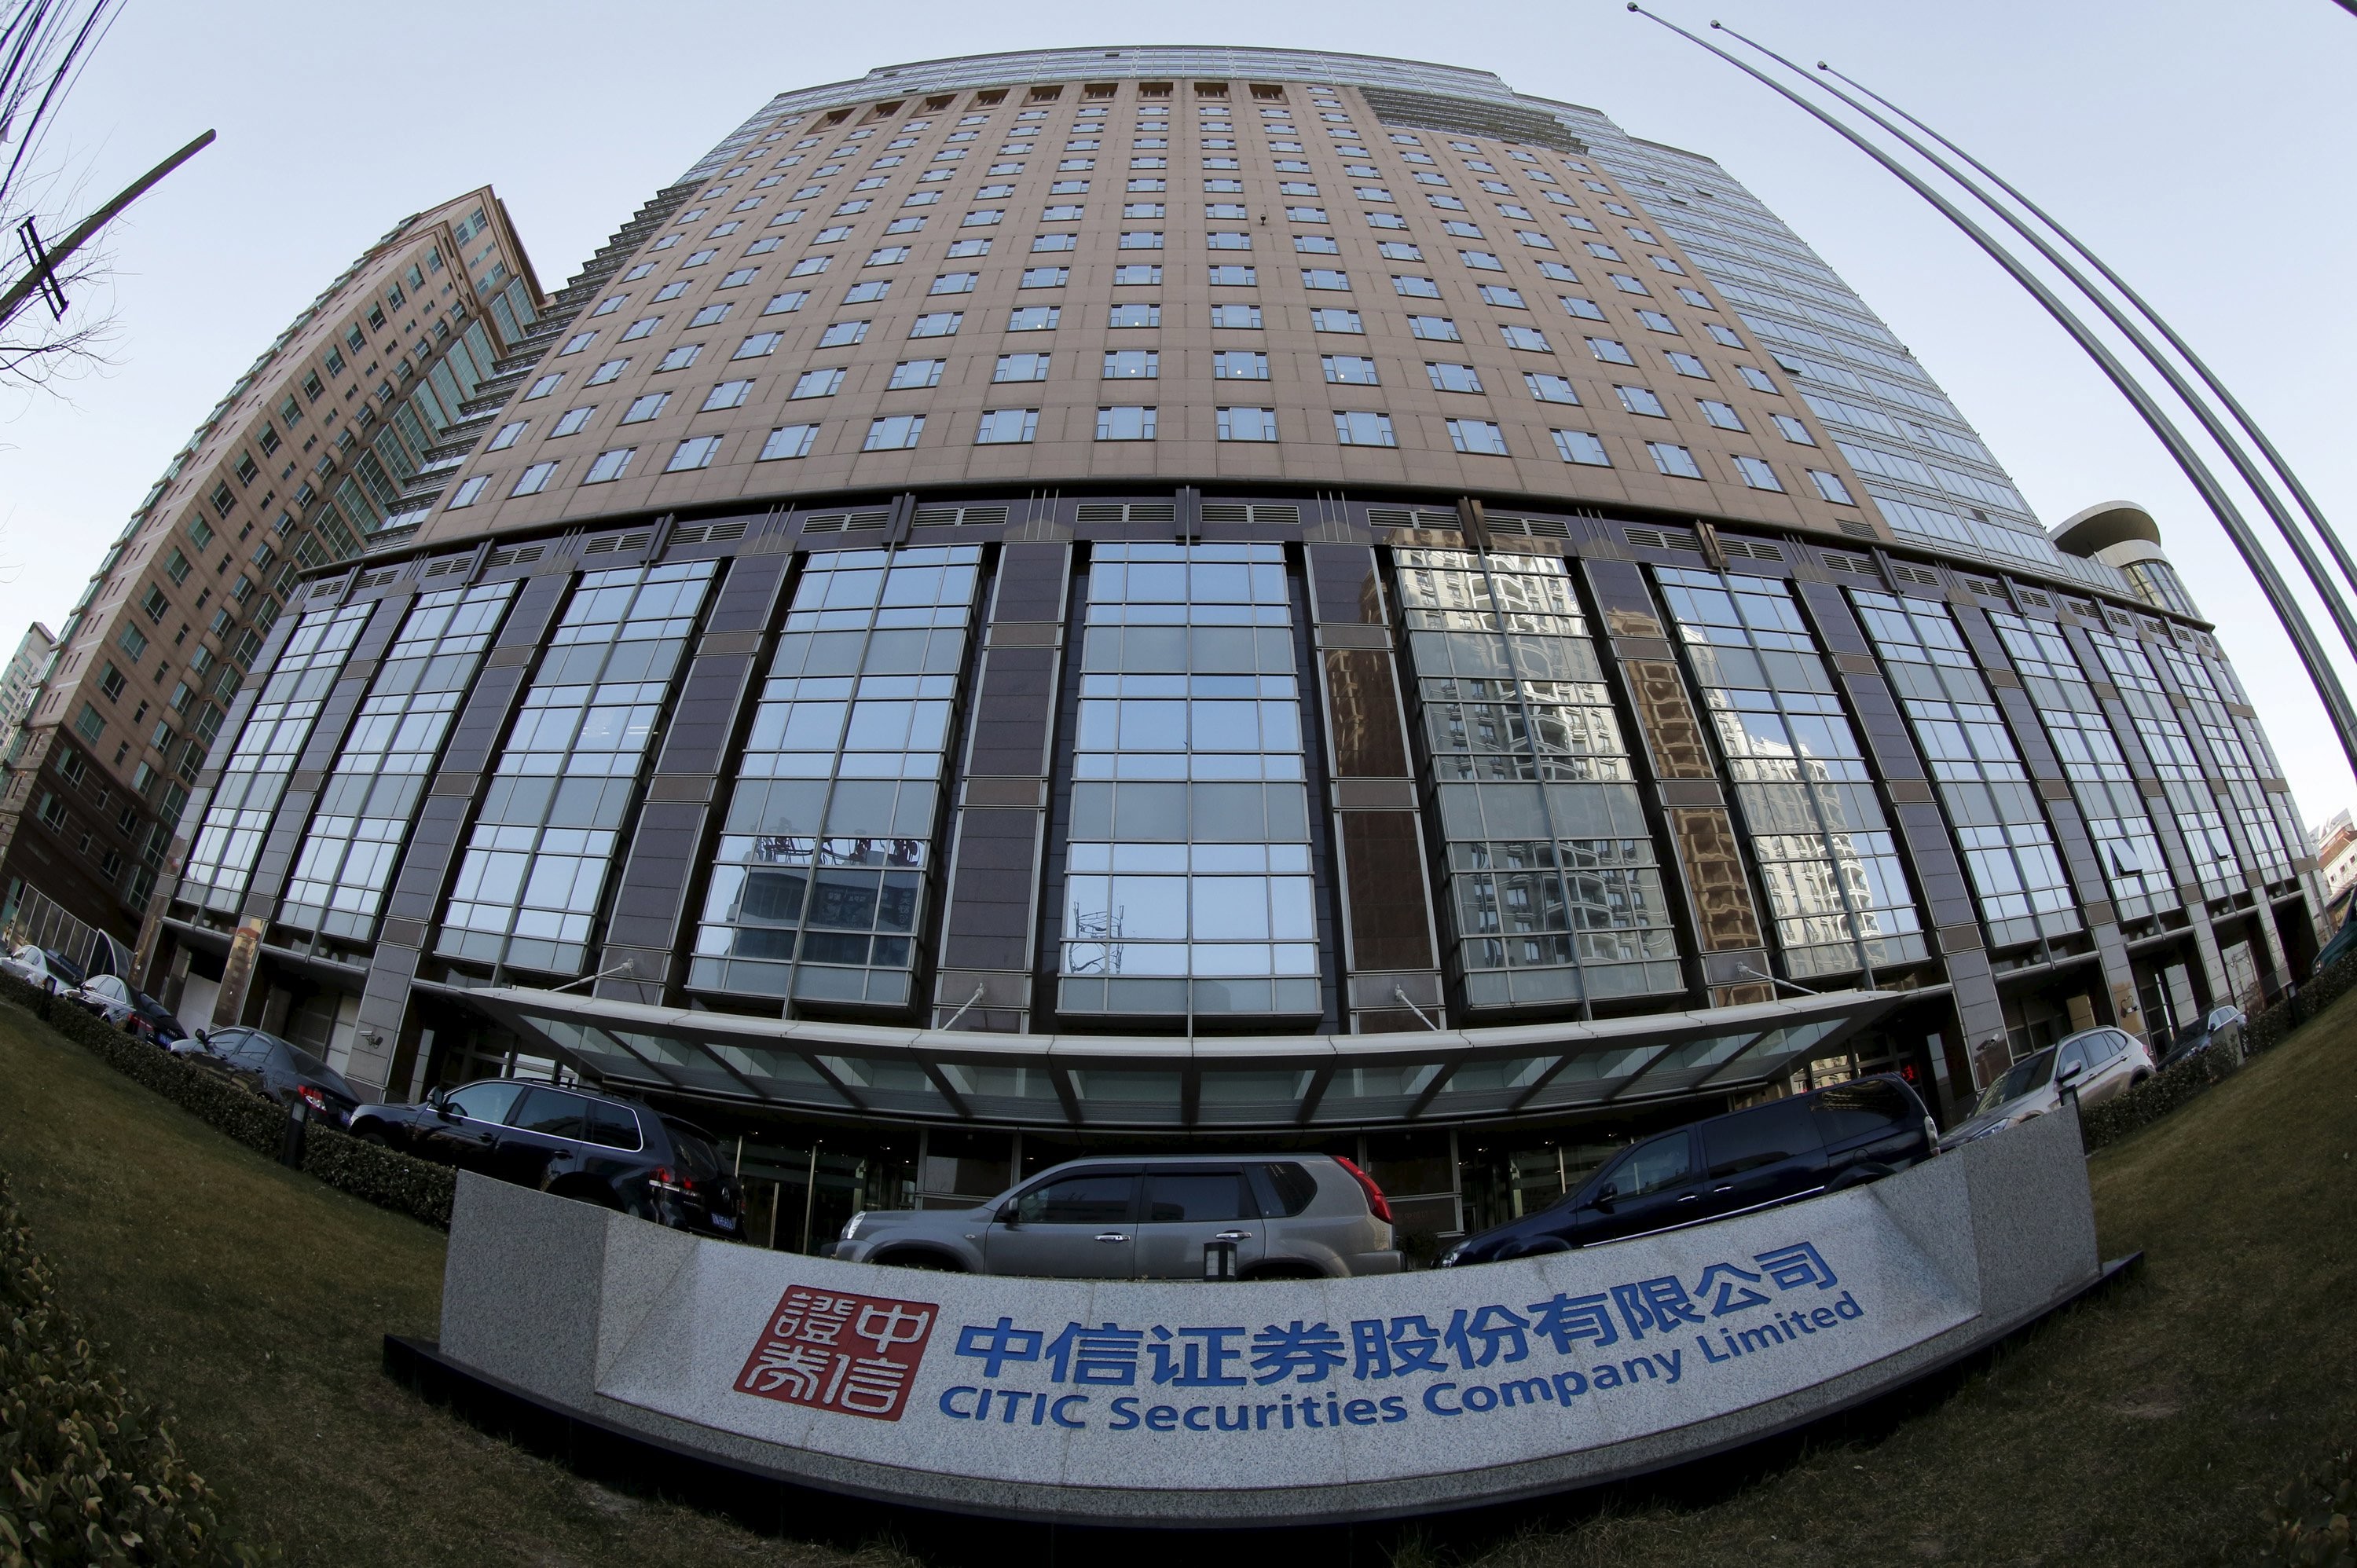 The largest Chinese brokers, including Citic and Haitong, have also stepped up efforts to secure a foothold in overseas markets such as Hong Kong. Photo: Reuters